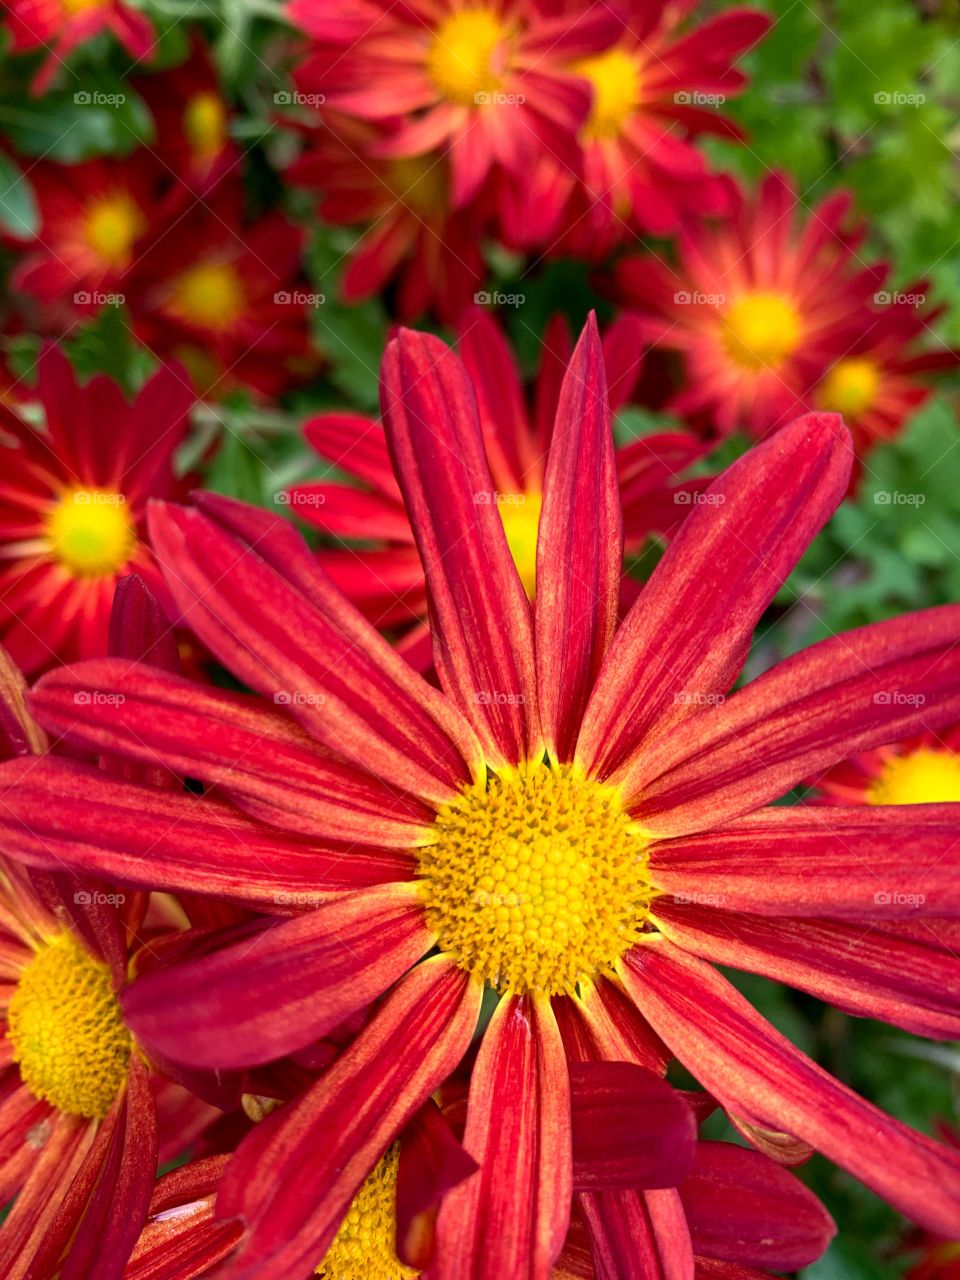 Bright yellow, orange, and red mums in a lovely garden with bright green leaves.